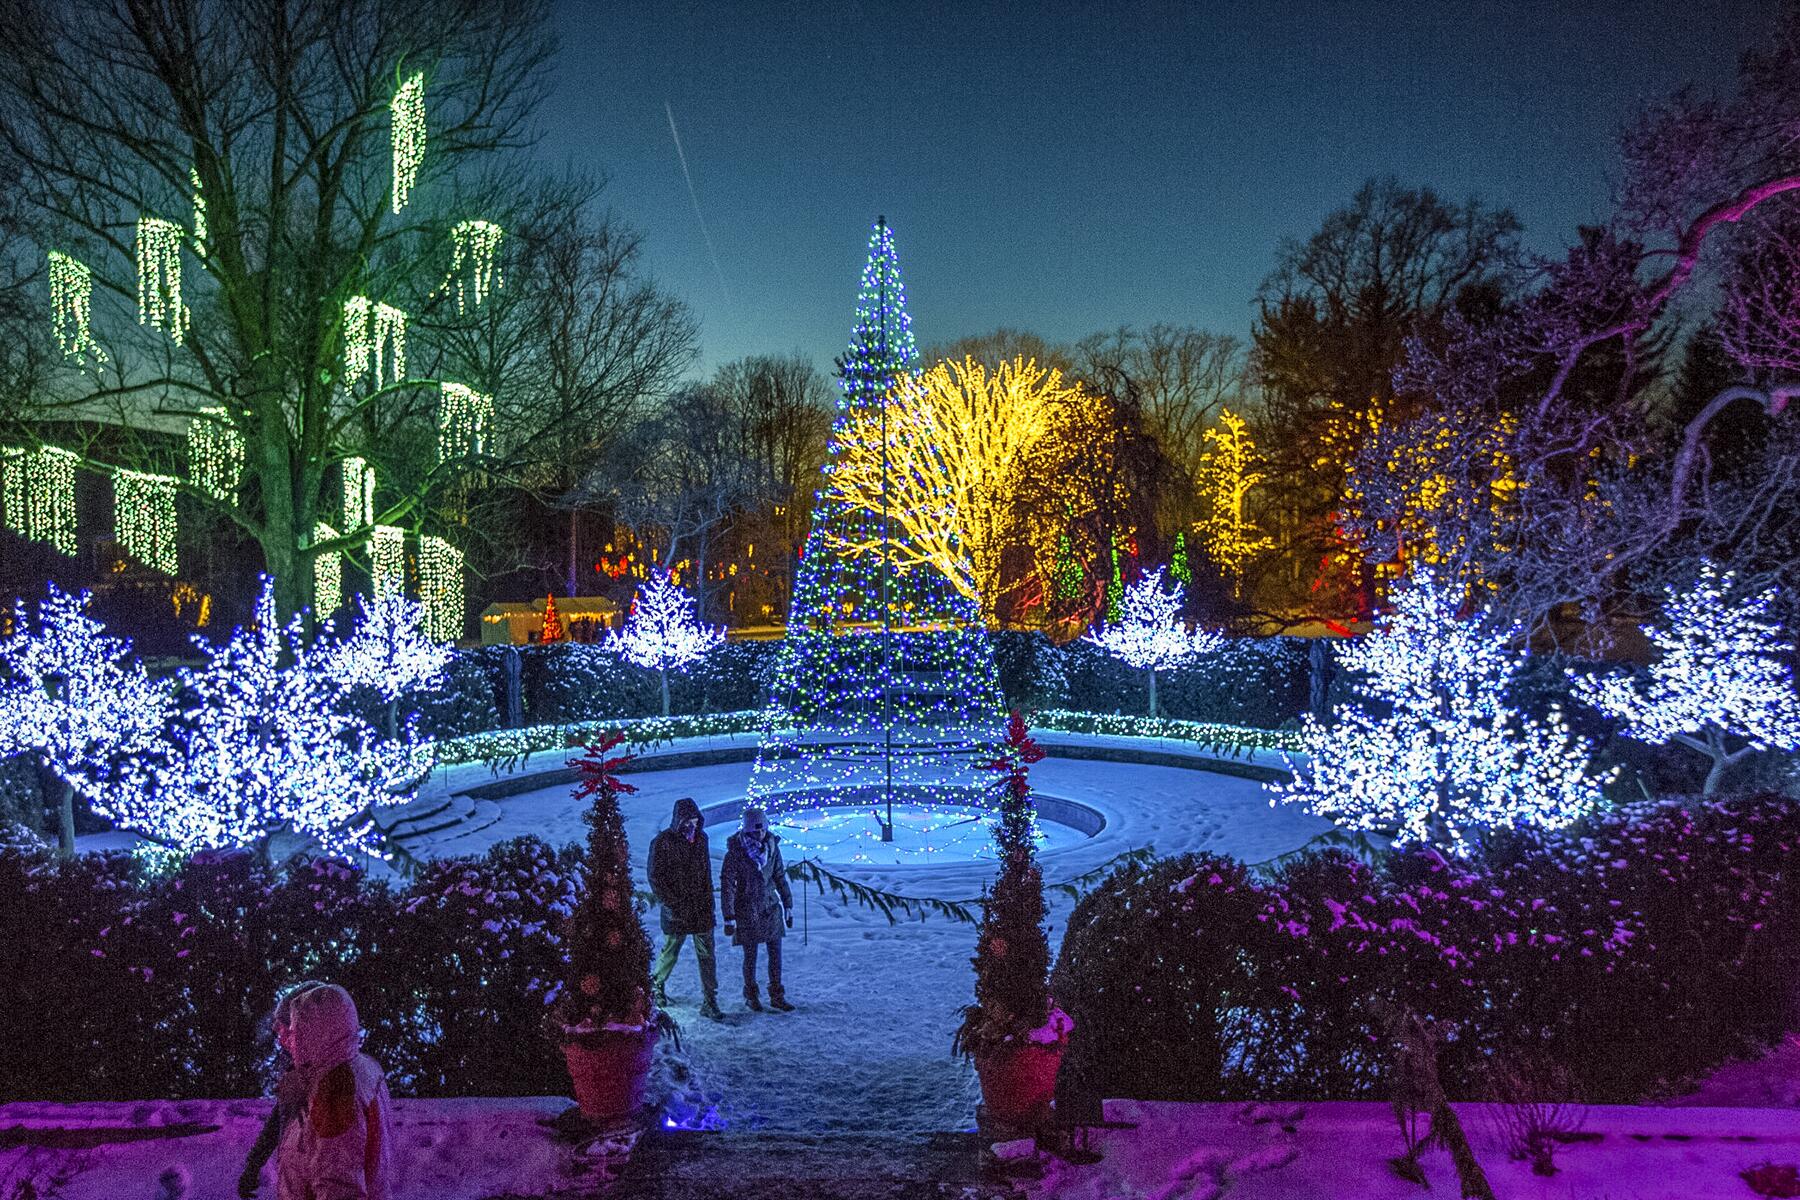 The Best Gardens to Visit During the Holidays